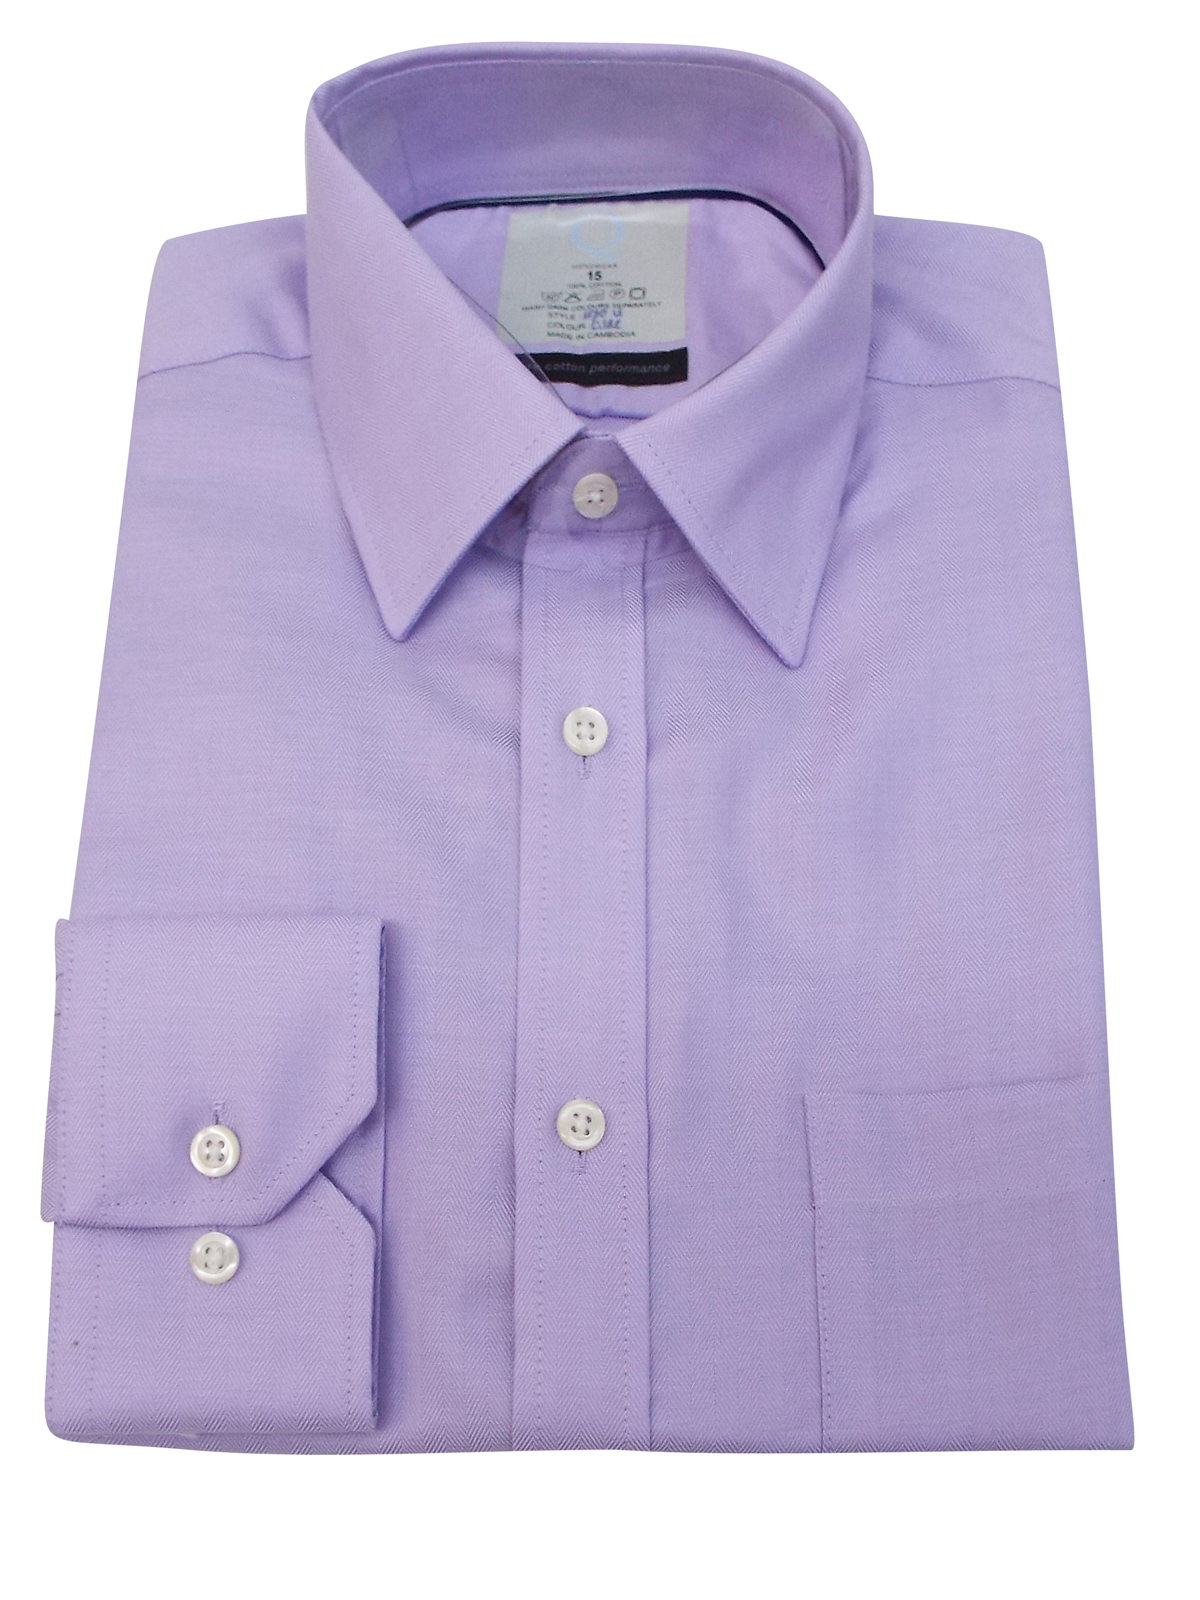 Marks and Spencer - - M&5 LILAC Performance Pure Cotton Non-Iron ...